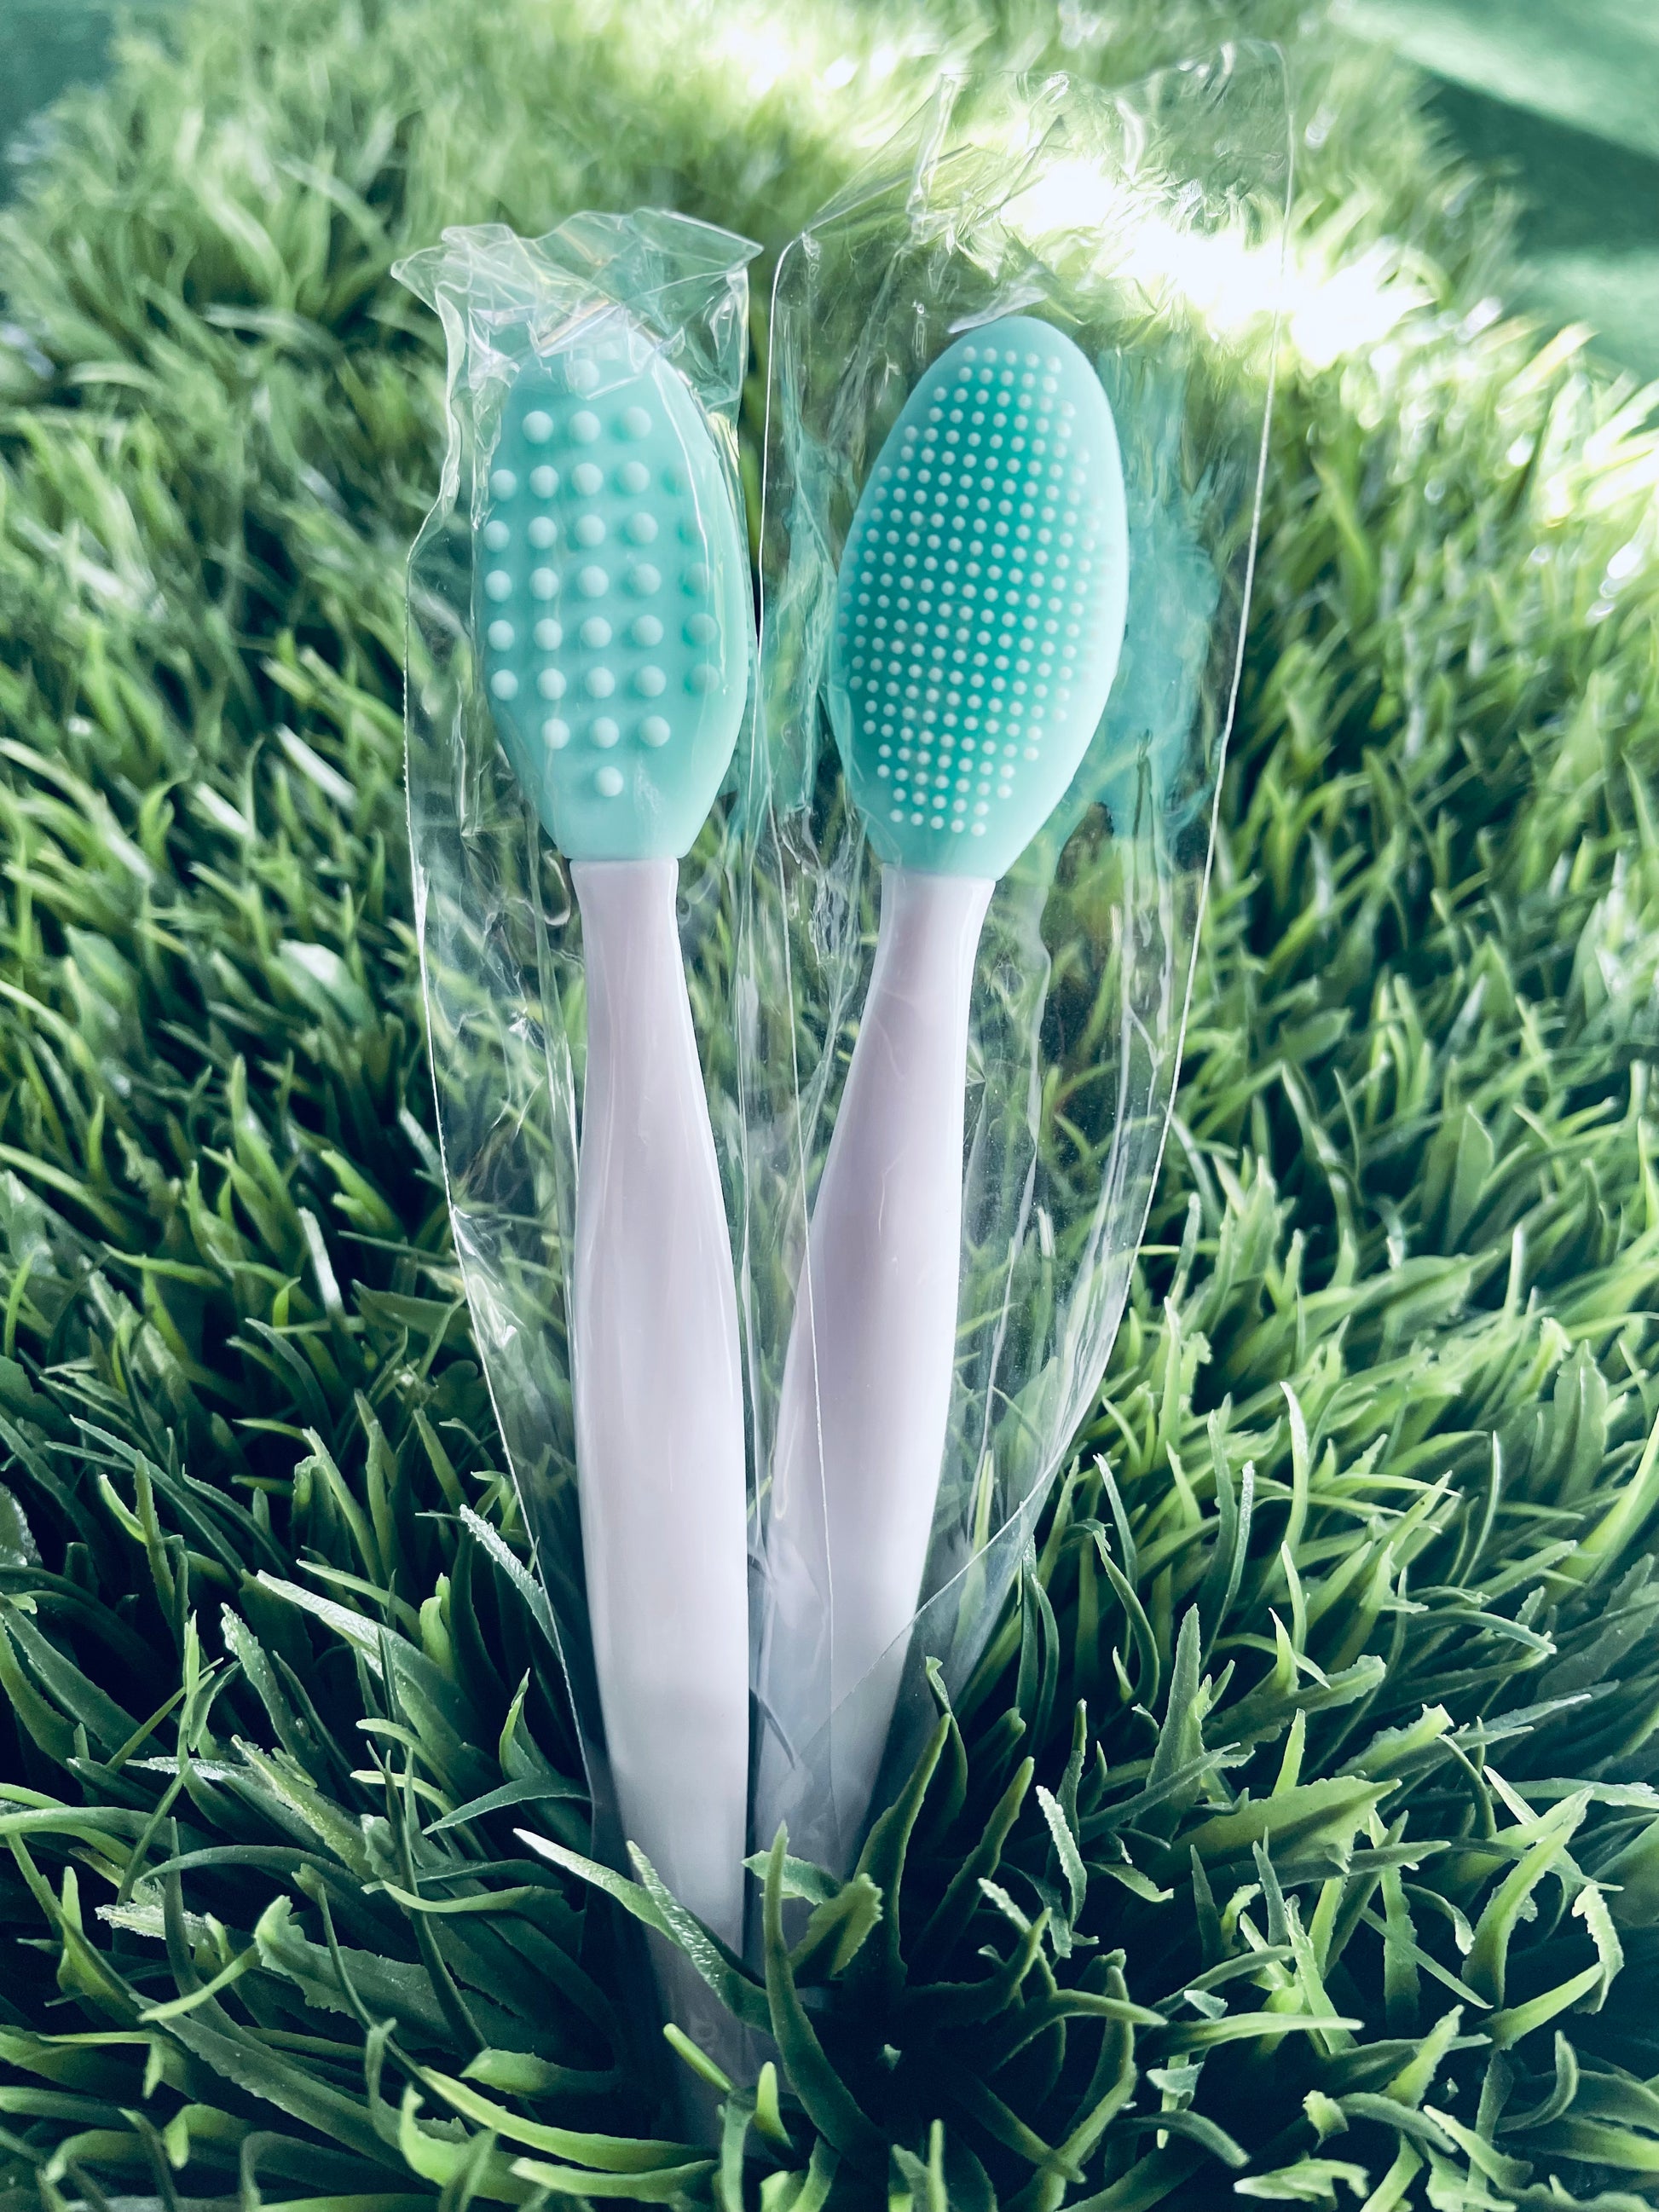 Lip Nose Exfoliating Scrub Brush Silicone Double-Sided Soft Face Clean  Tools